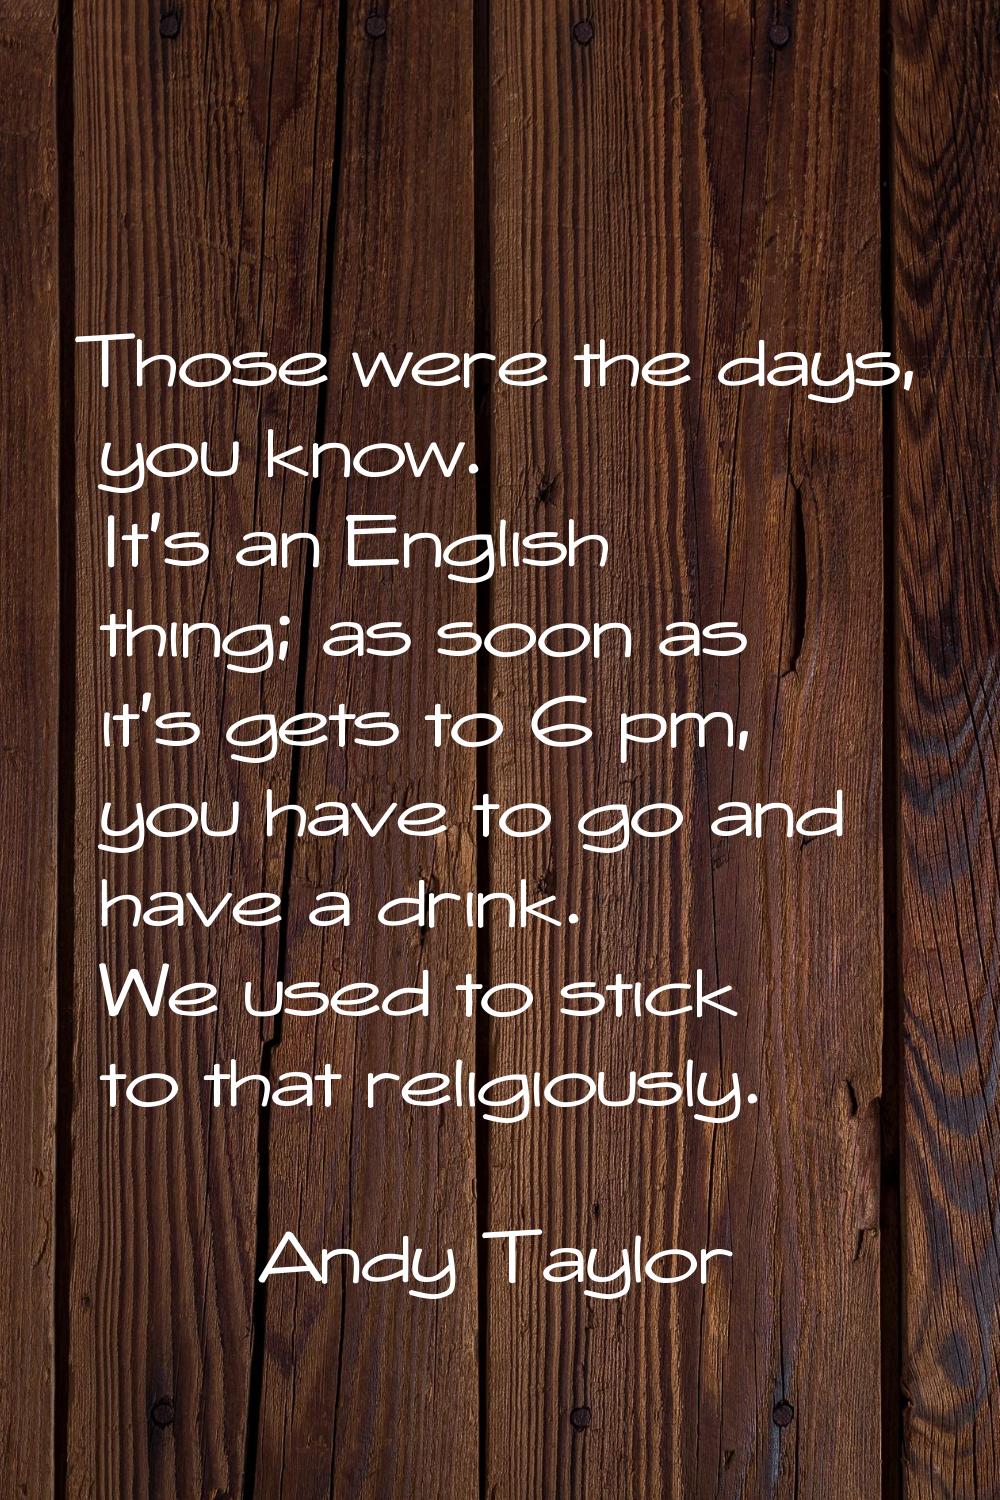 Those were the days, you know. It's an English thing; as soon as it's gets to 6 pm, you have to go 